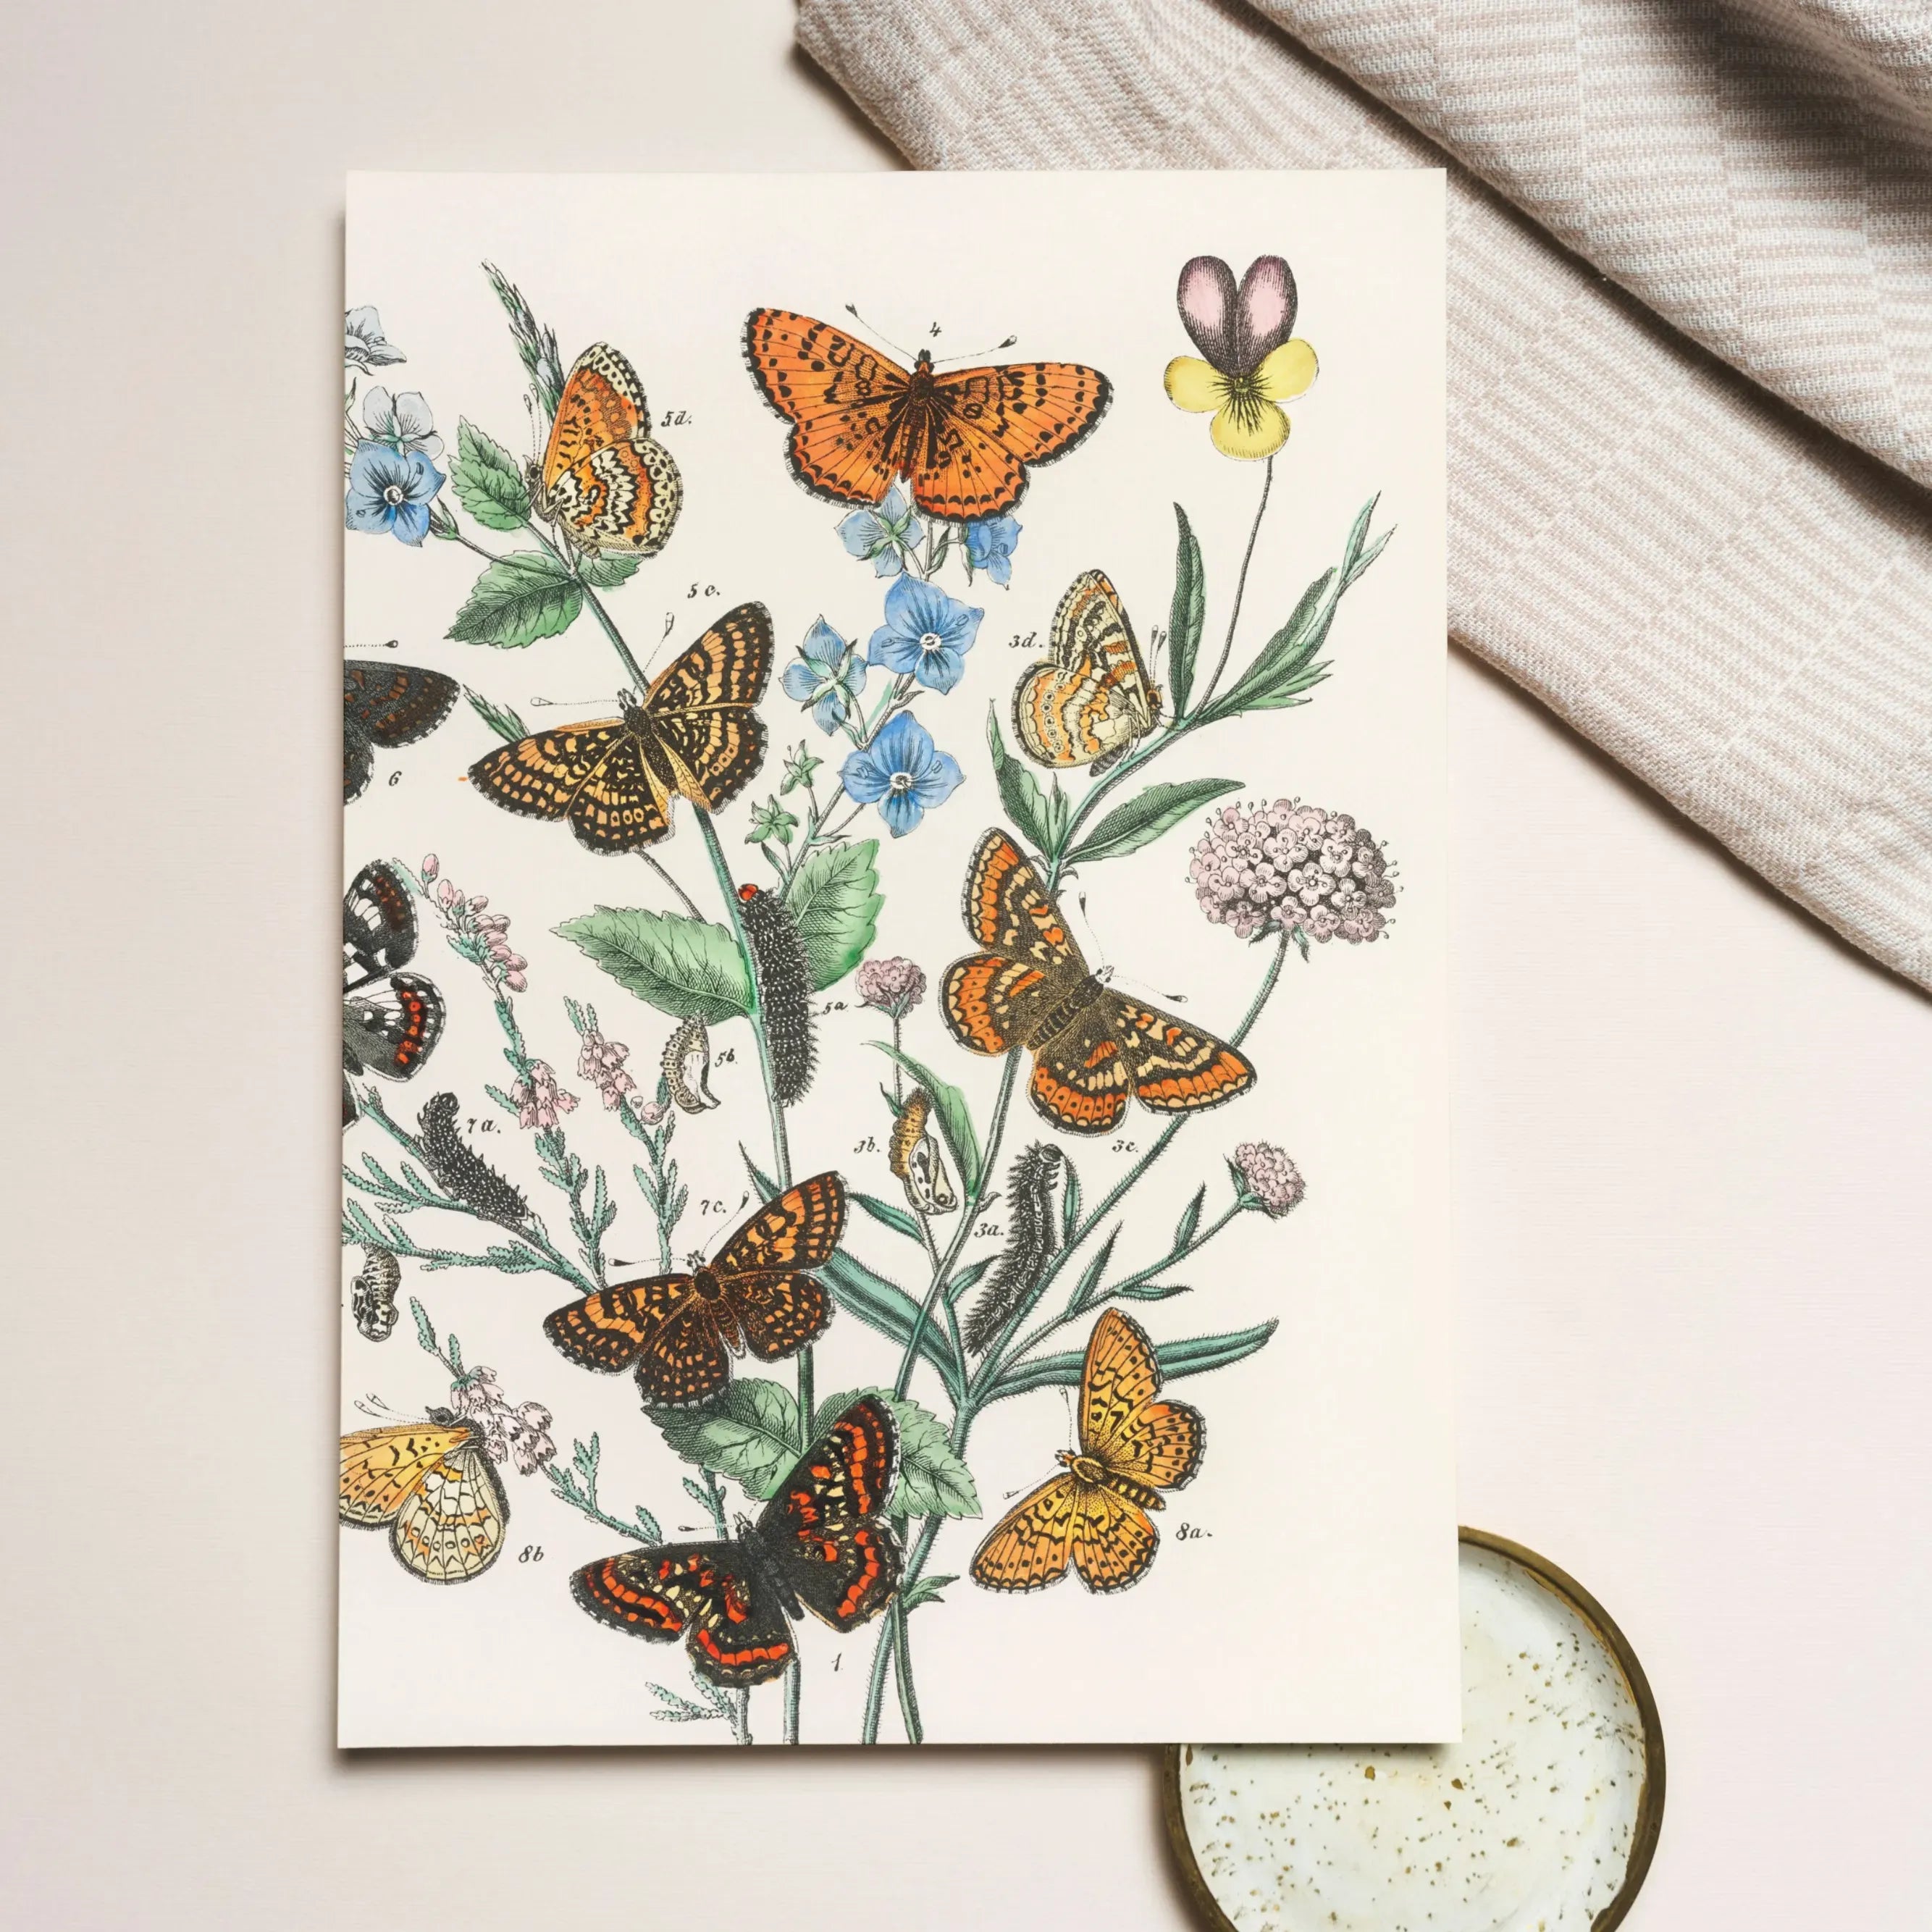 European Butterflies And Moths 2 By William Forsell Kirby Greeting Card - Greeting & Note Cards - Aesthetic Art